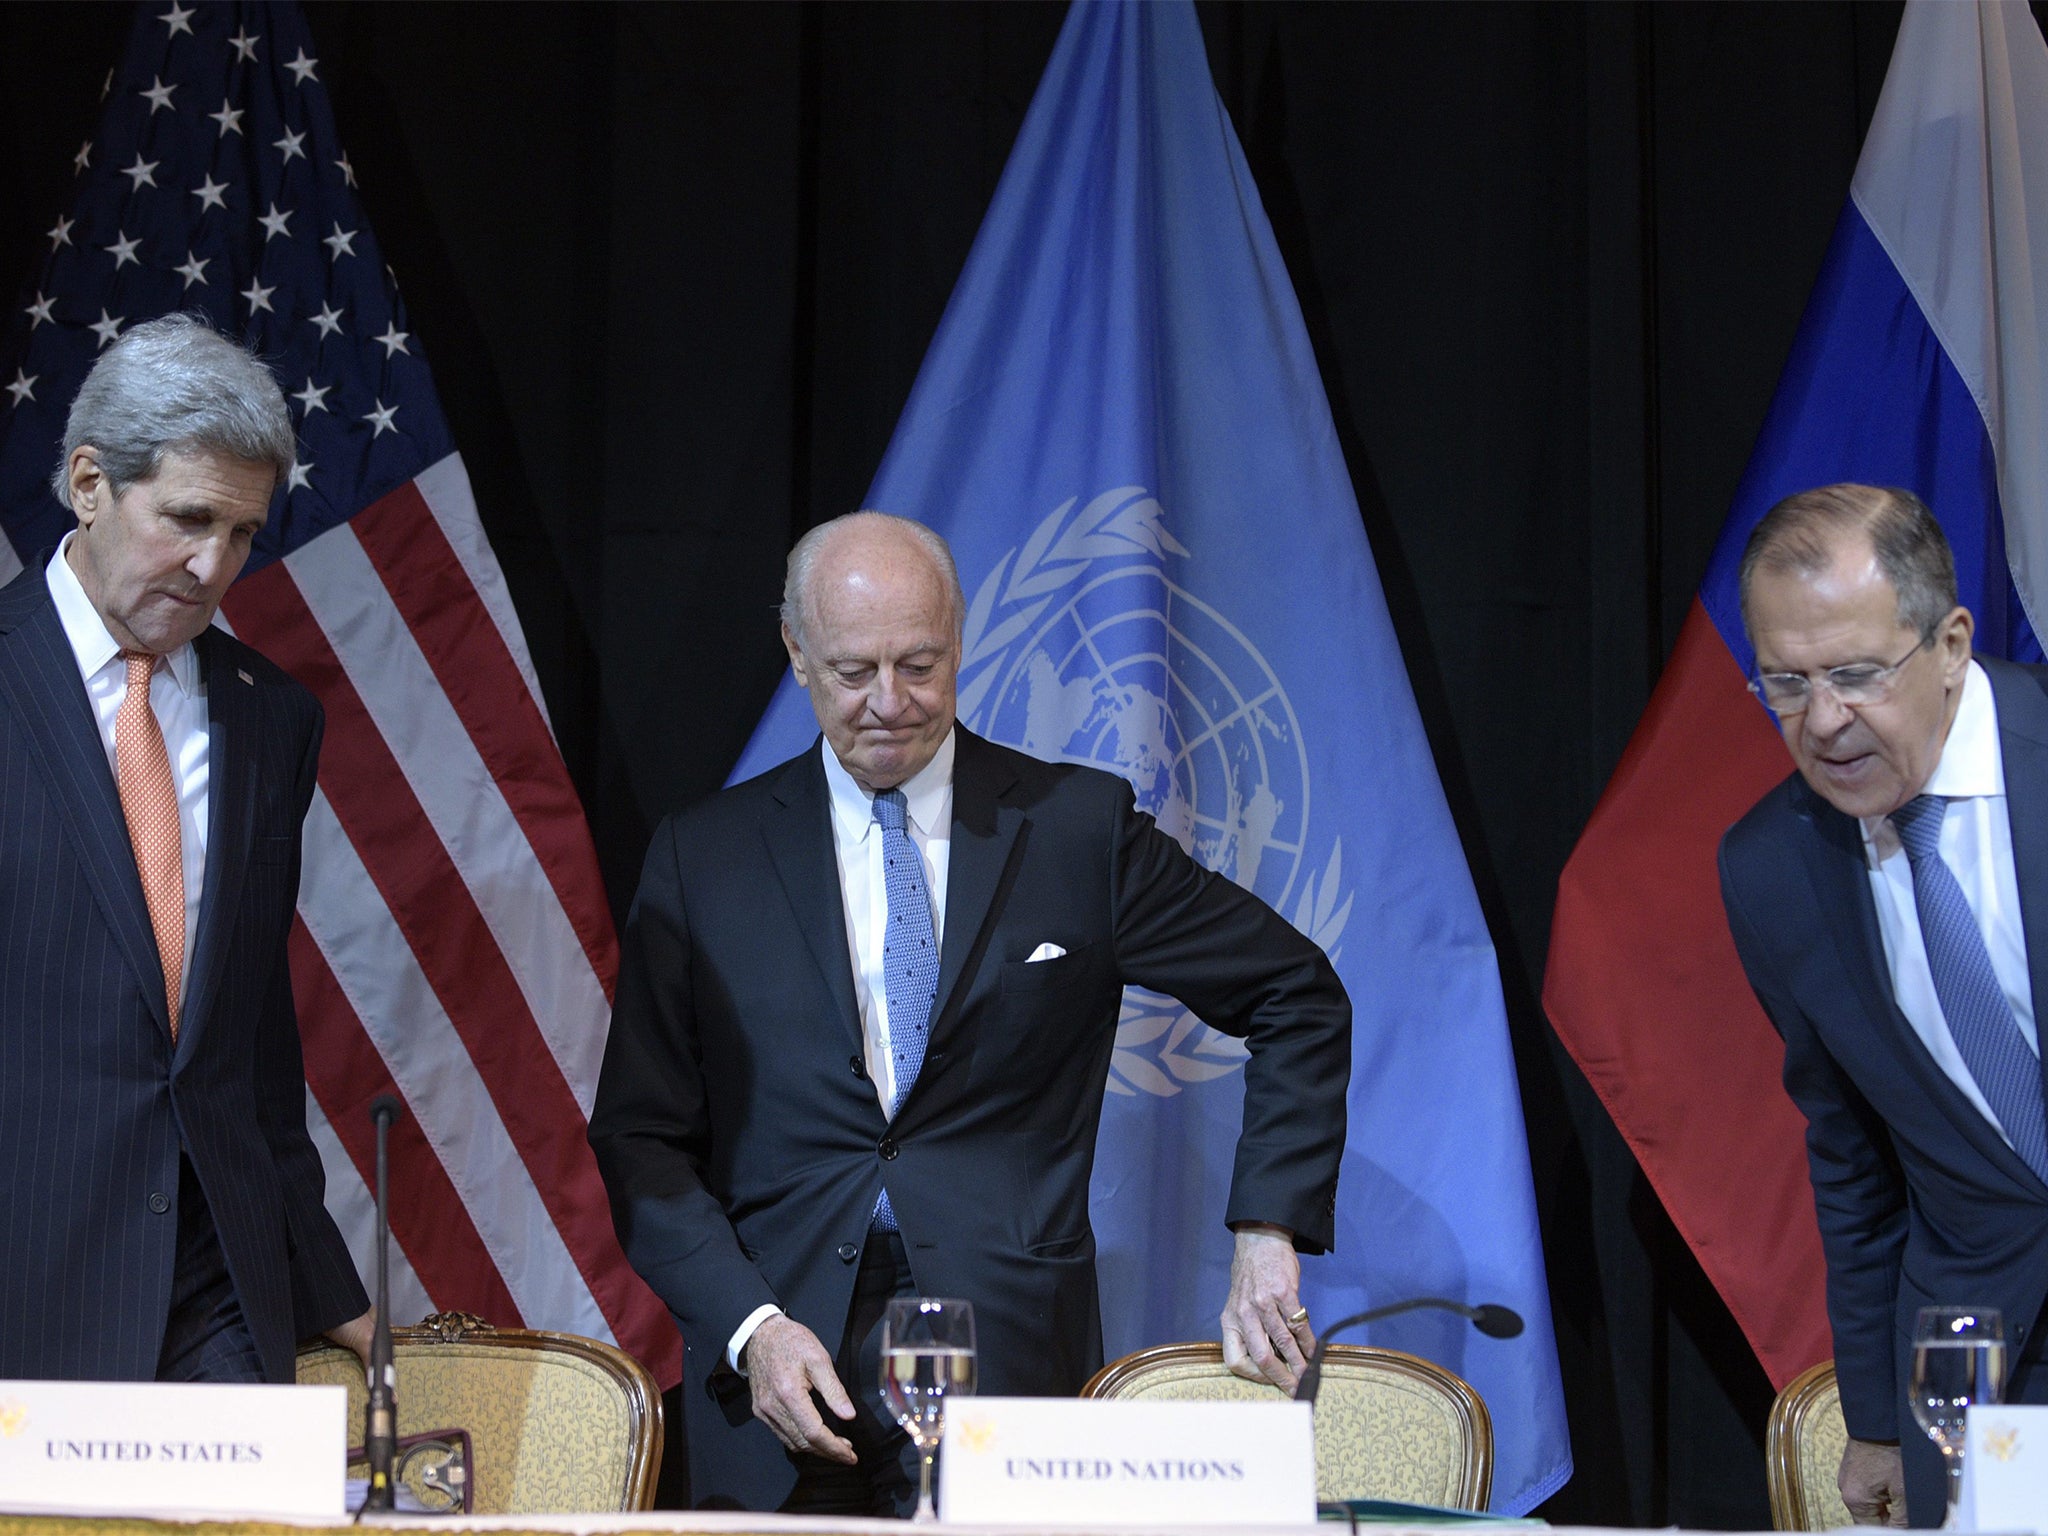 Secretary of State John Kerry, United Nations Special Envoy for Syria Staffan de Mistura and Russian Foreign Minister Sergei Lavrov, during a news conference after an international conference on Syria, in Vienna,